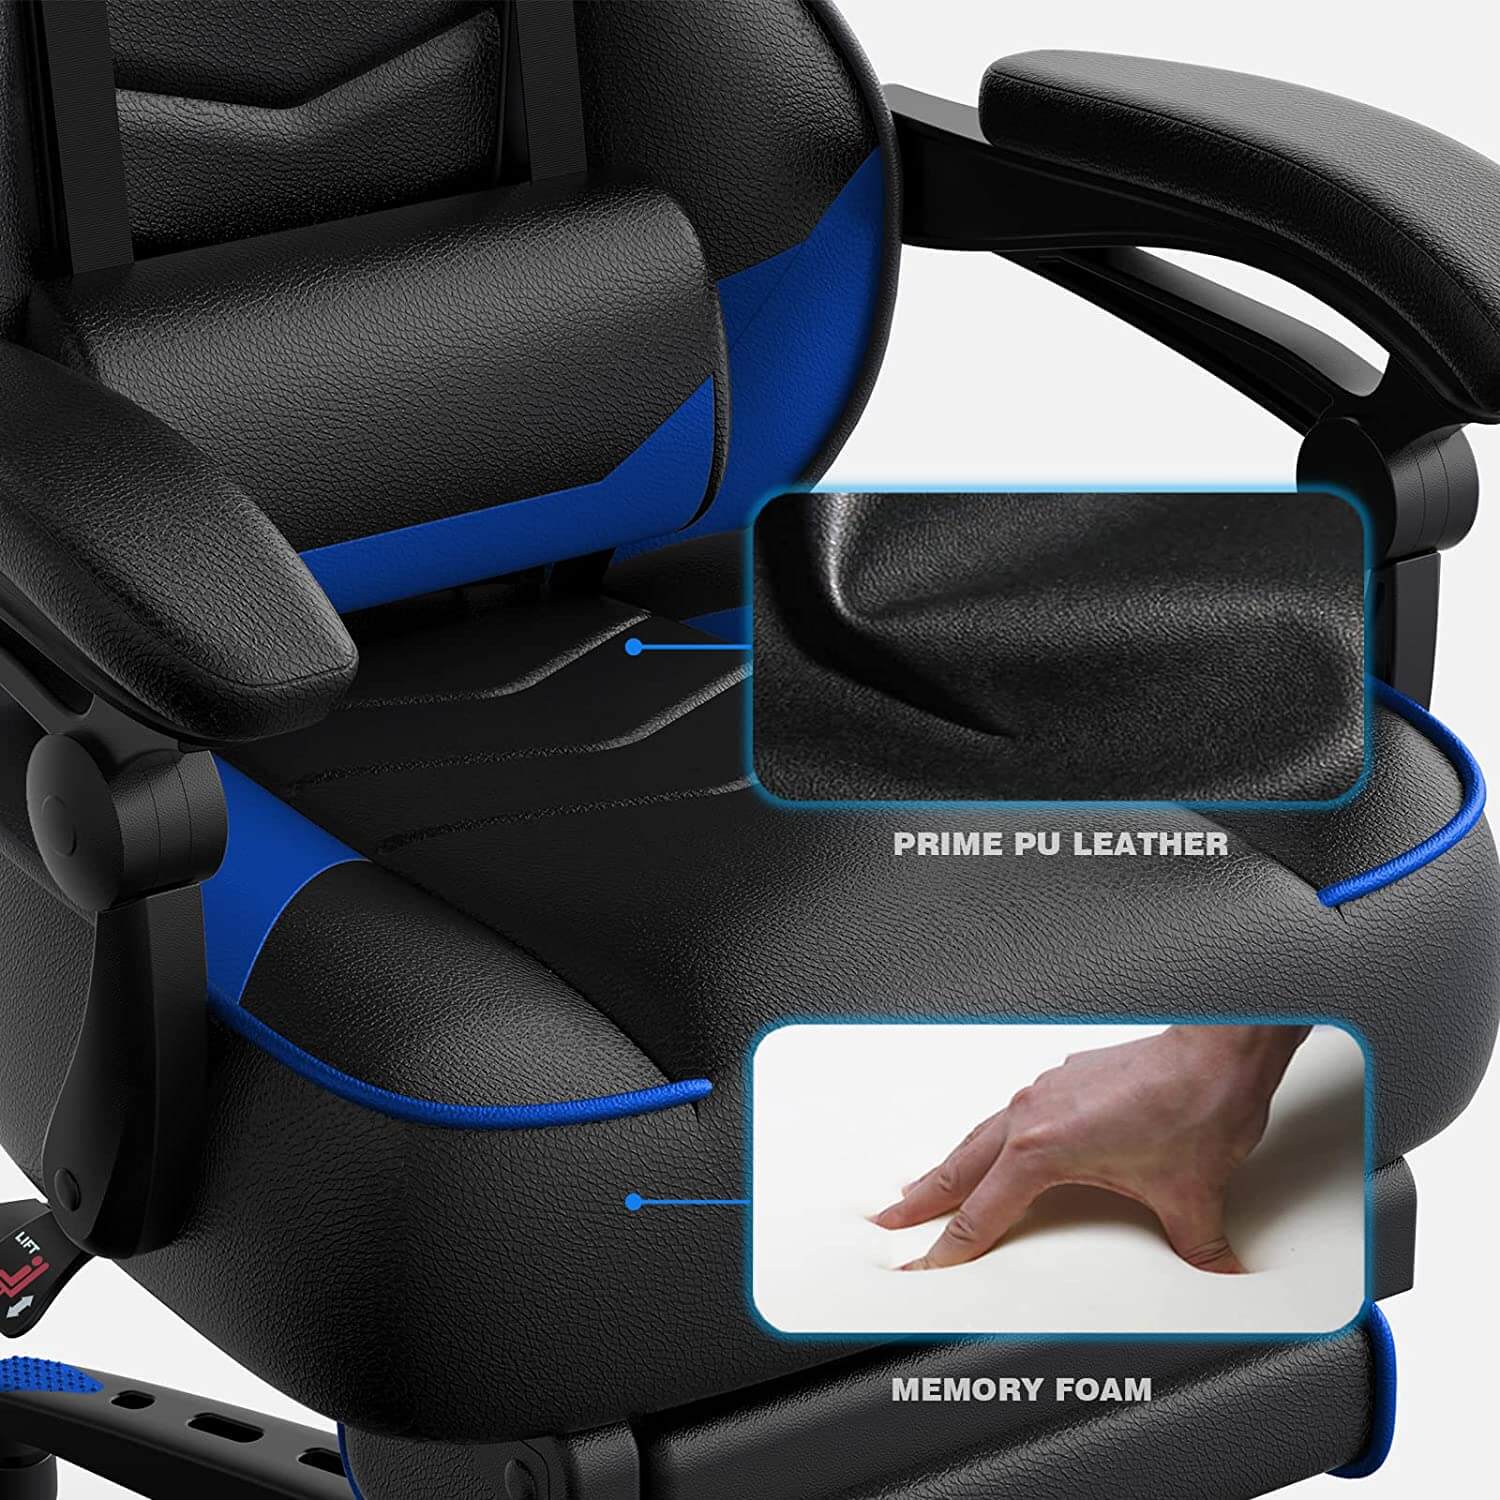 Elecwish blue massage gaming chair with footrest OC112 has orime PU leather and memory foam